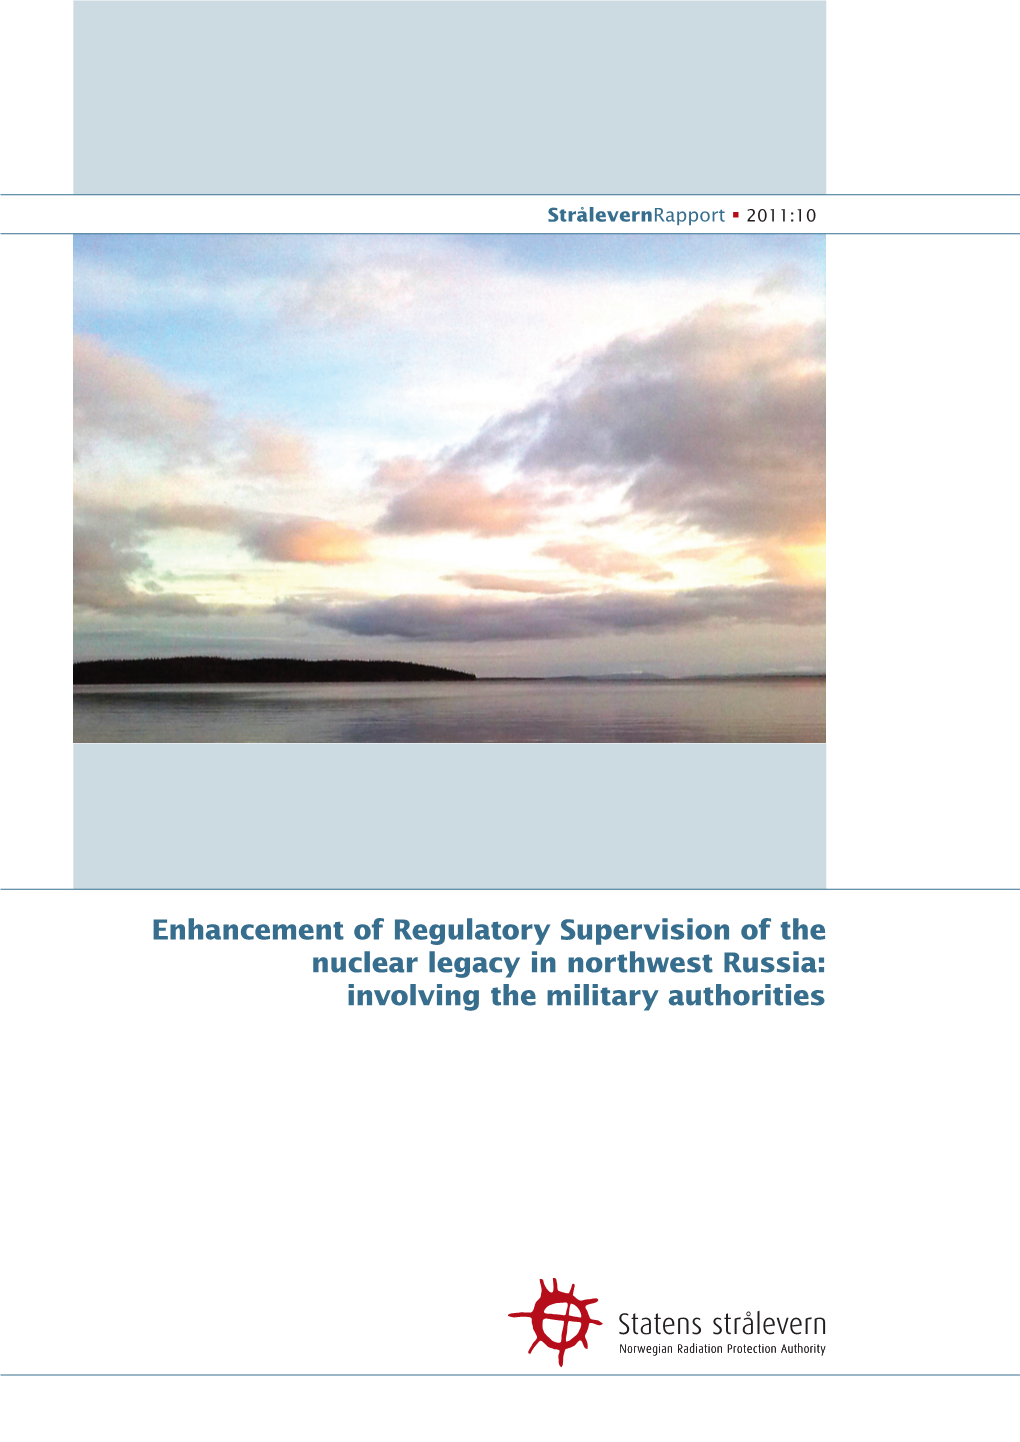 Enhancement of Regulatory Supervision of the Nuclear Legacy In